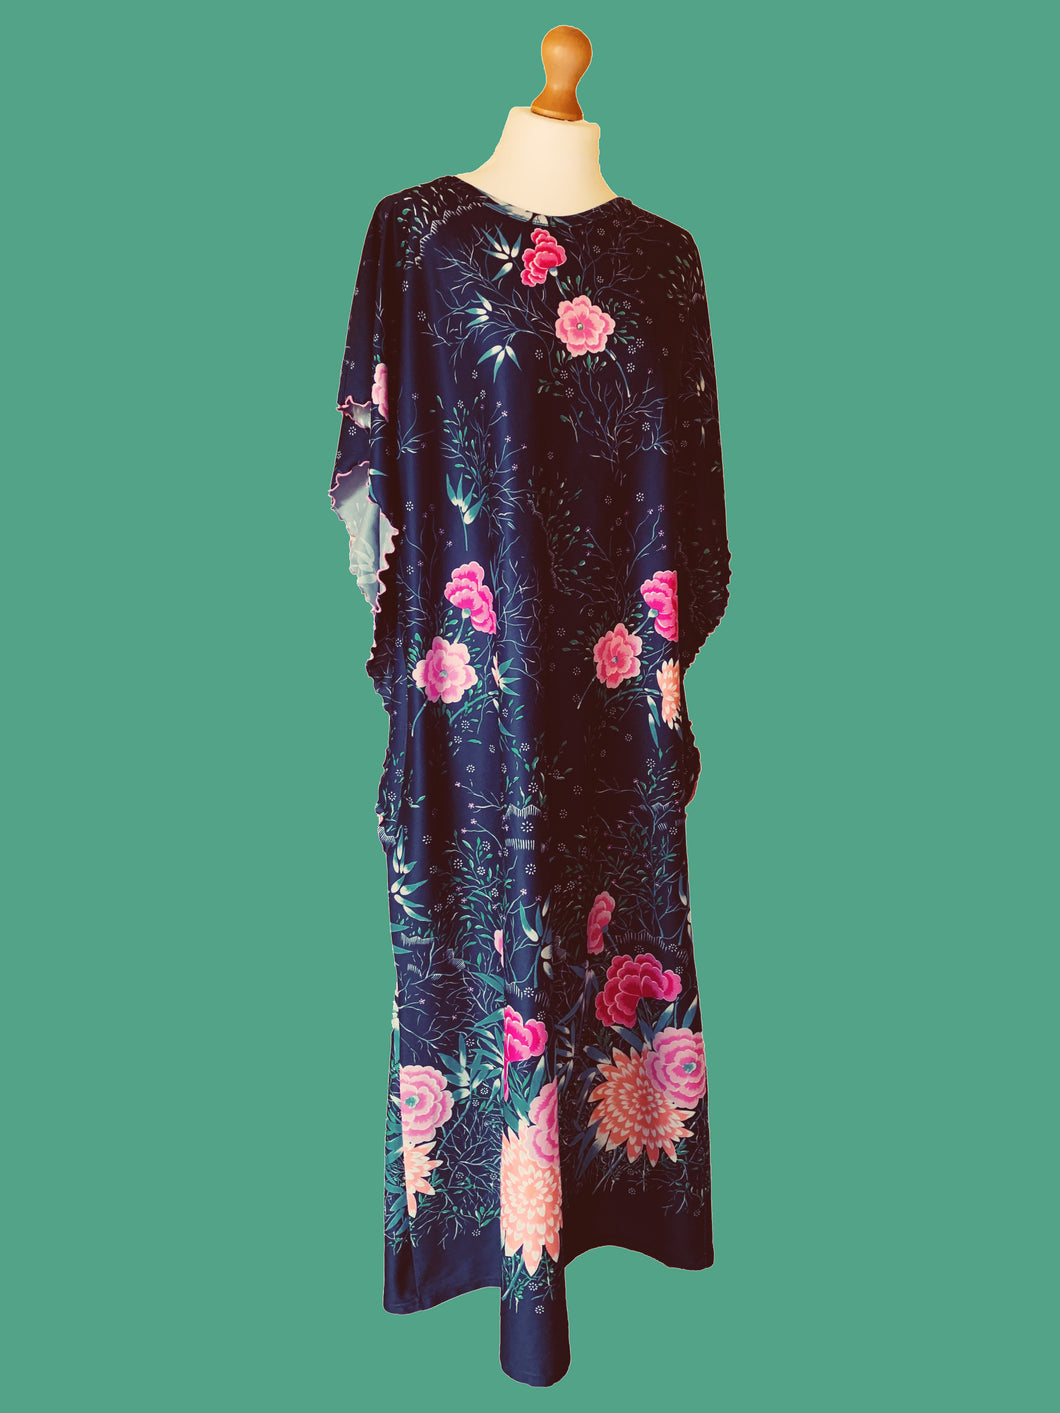 70s / 80s one size kaftan dress with floral print